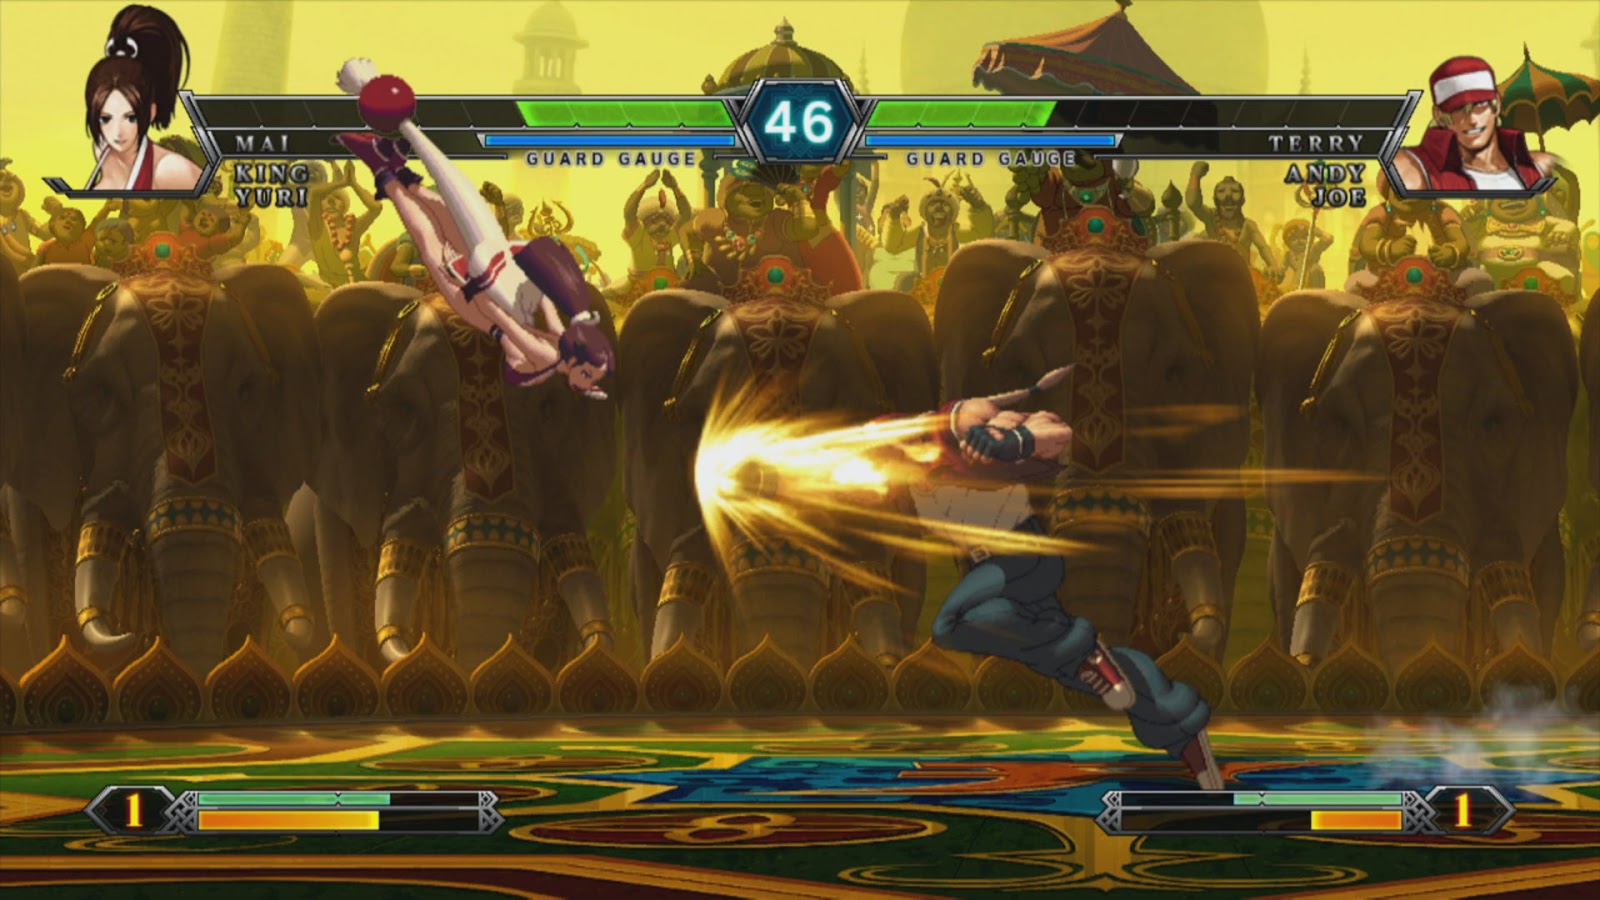 The King of Fighters XIII. King of Fighters 13. The King of Fighters 13 ростер. KOFXIII. Игра 13 королей